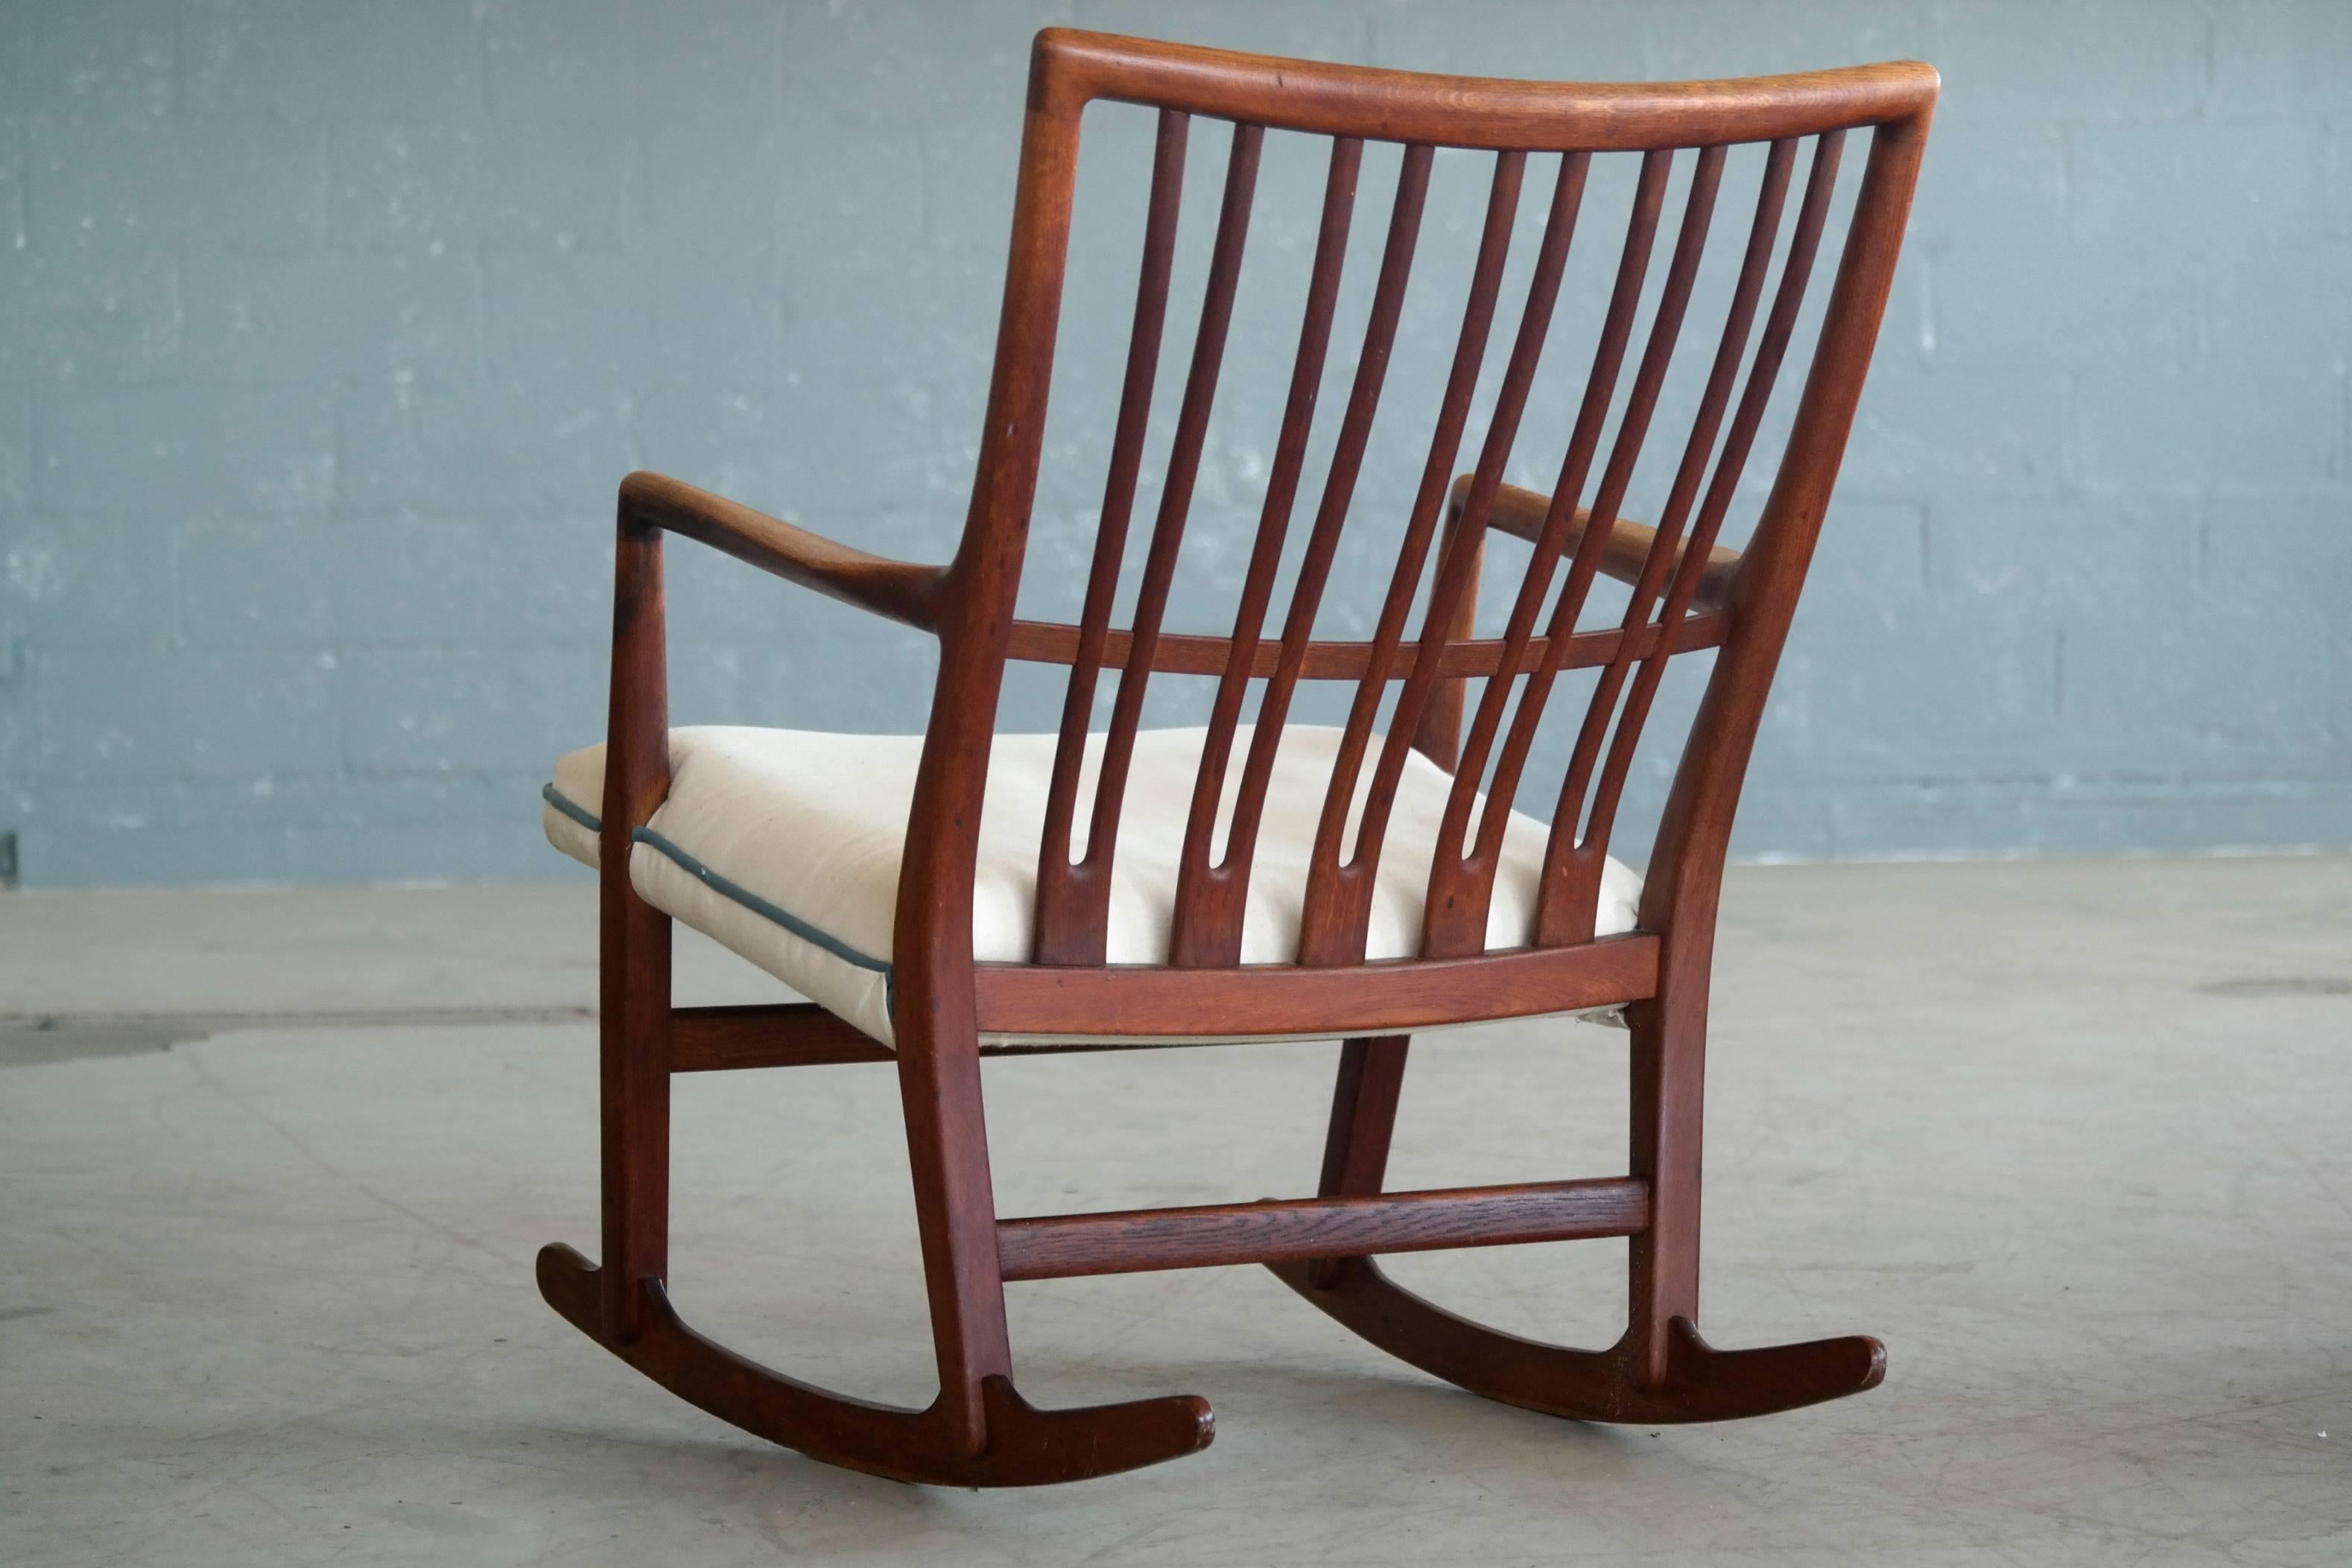 One of the few collaborations between Hans Wegner and Master Cabinetmaker, Mikael Laursen the ML-33 rocker was designed and presented to the public in 1942. Mostly found in oak and beech wood we believe this more rare teak version was made in the